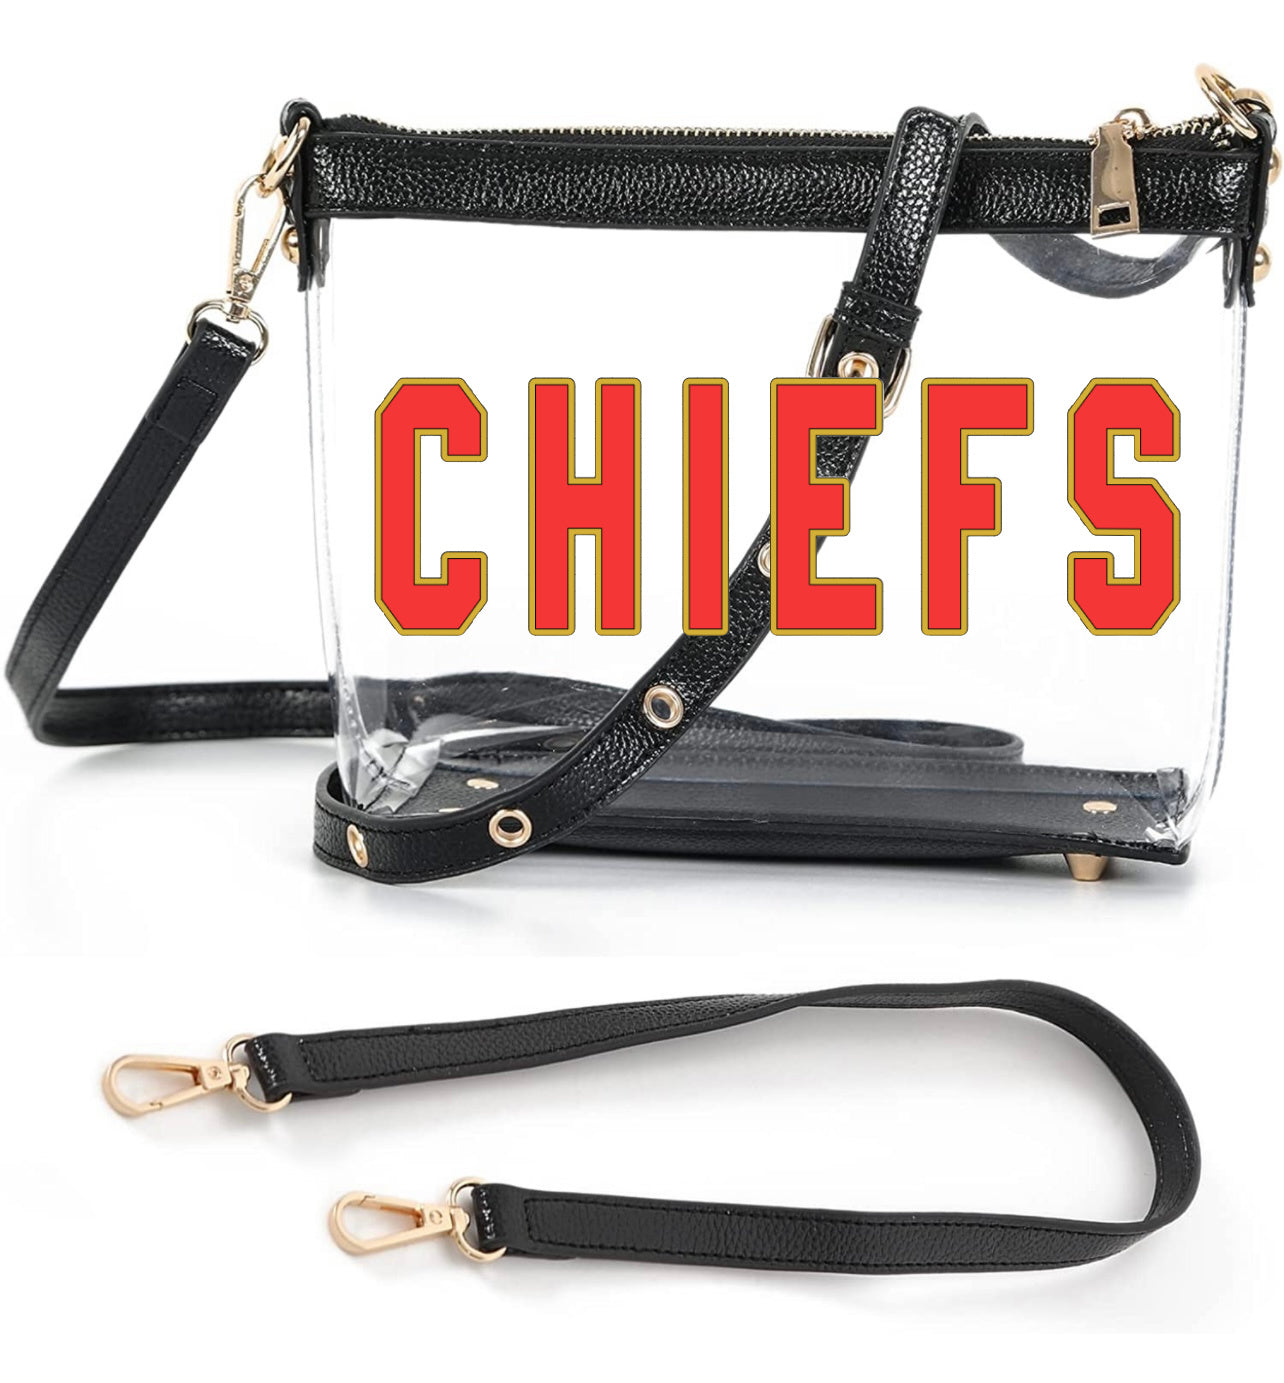 Capri Designs Clear Small Crossbody Bag, Stadium Approved with